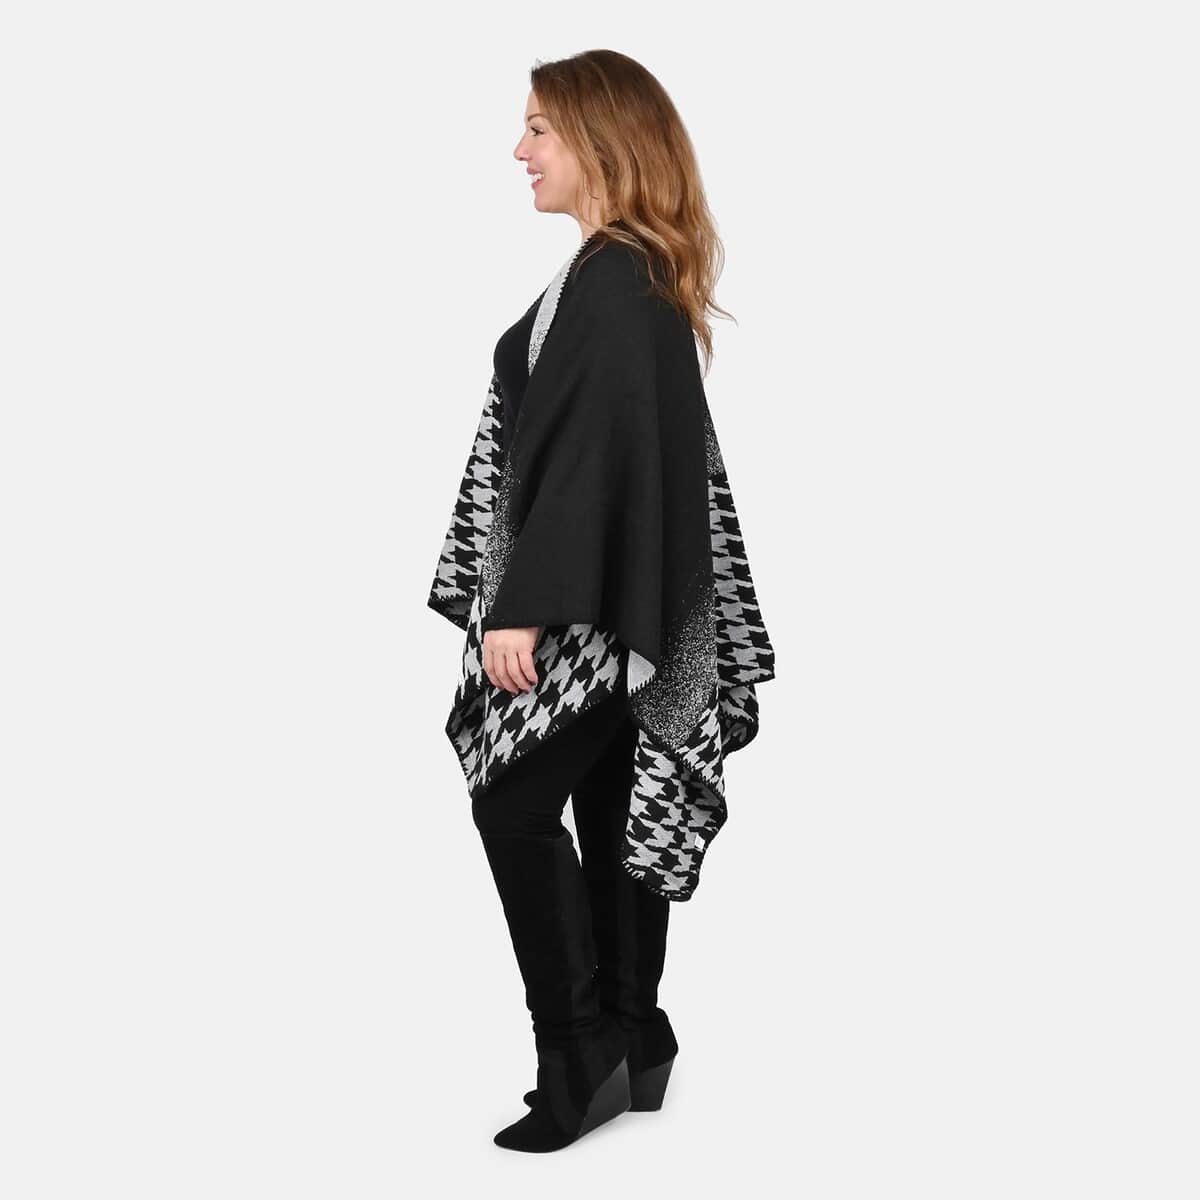 Tamsy Black Houndstooth Reversible Kimono - One Size Fits Most image number 2